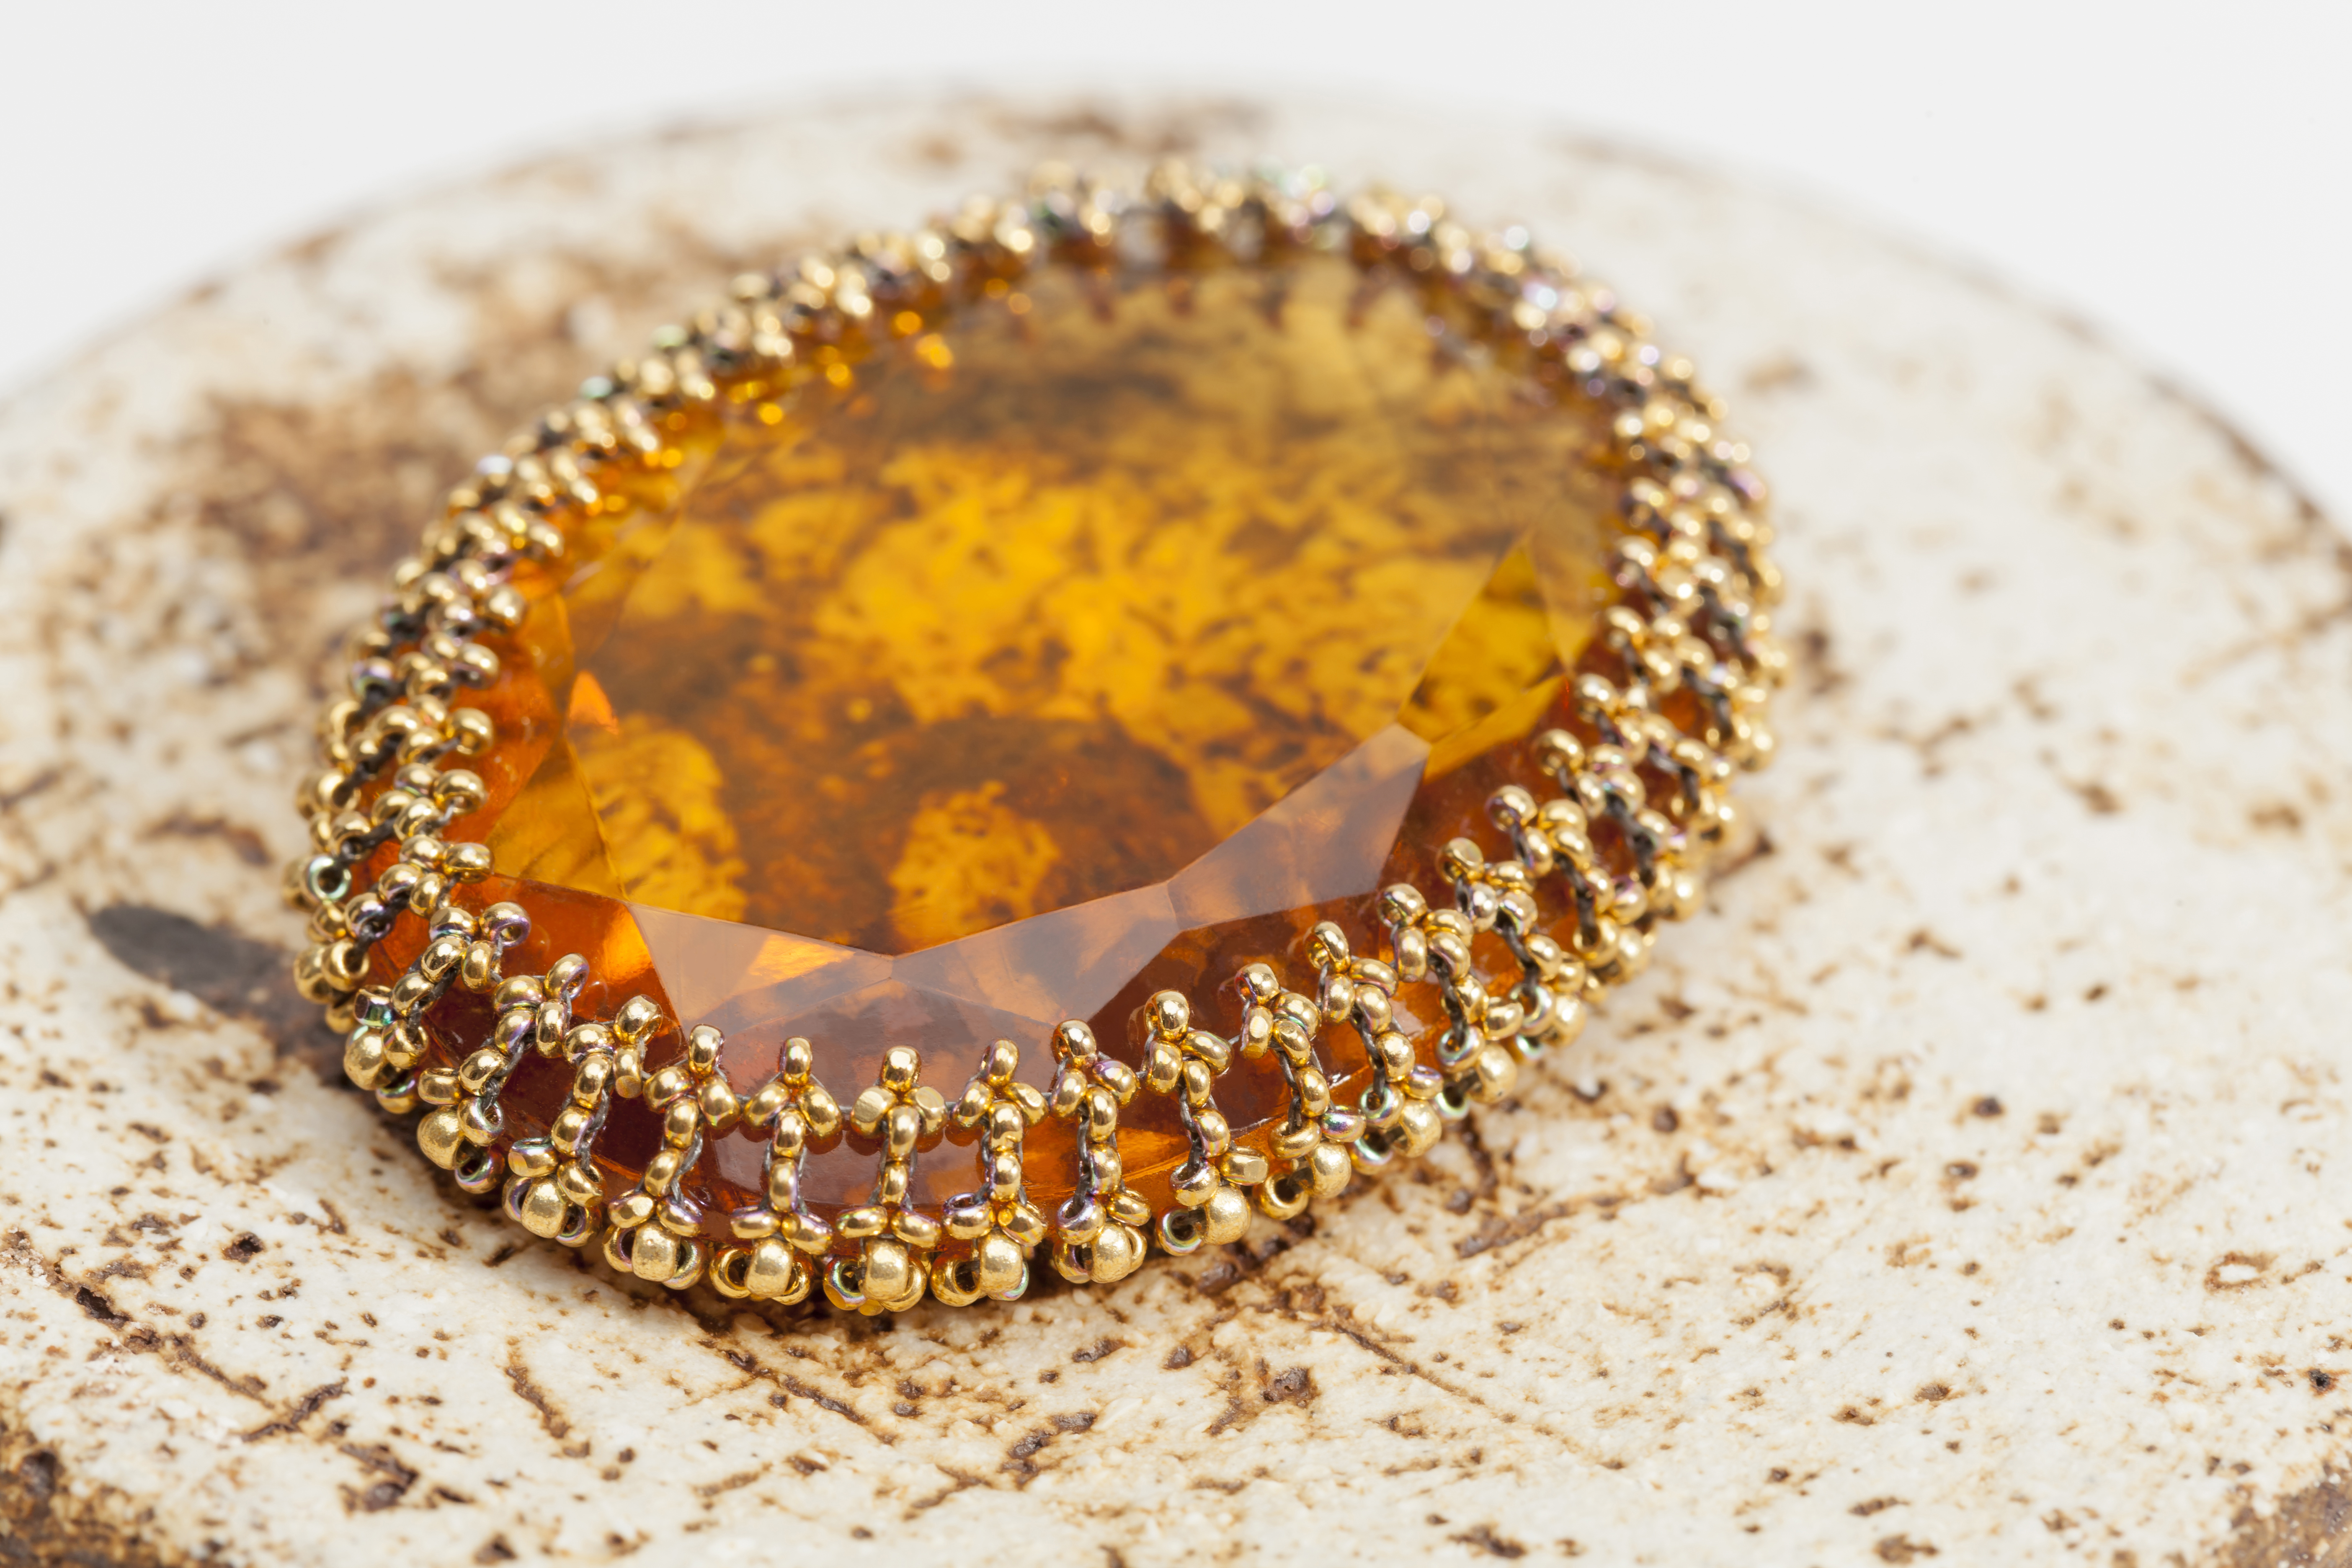 A beautiful cabochon that I captured with Hubble Stitch using 24K gold-coated Czech Charlottes